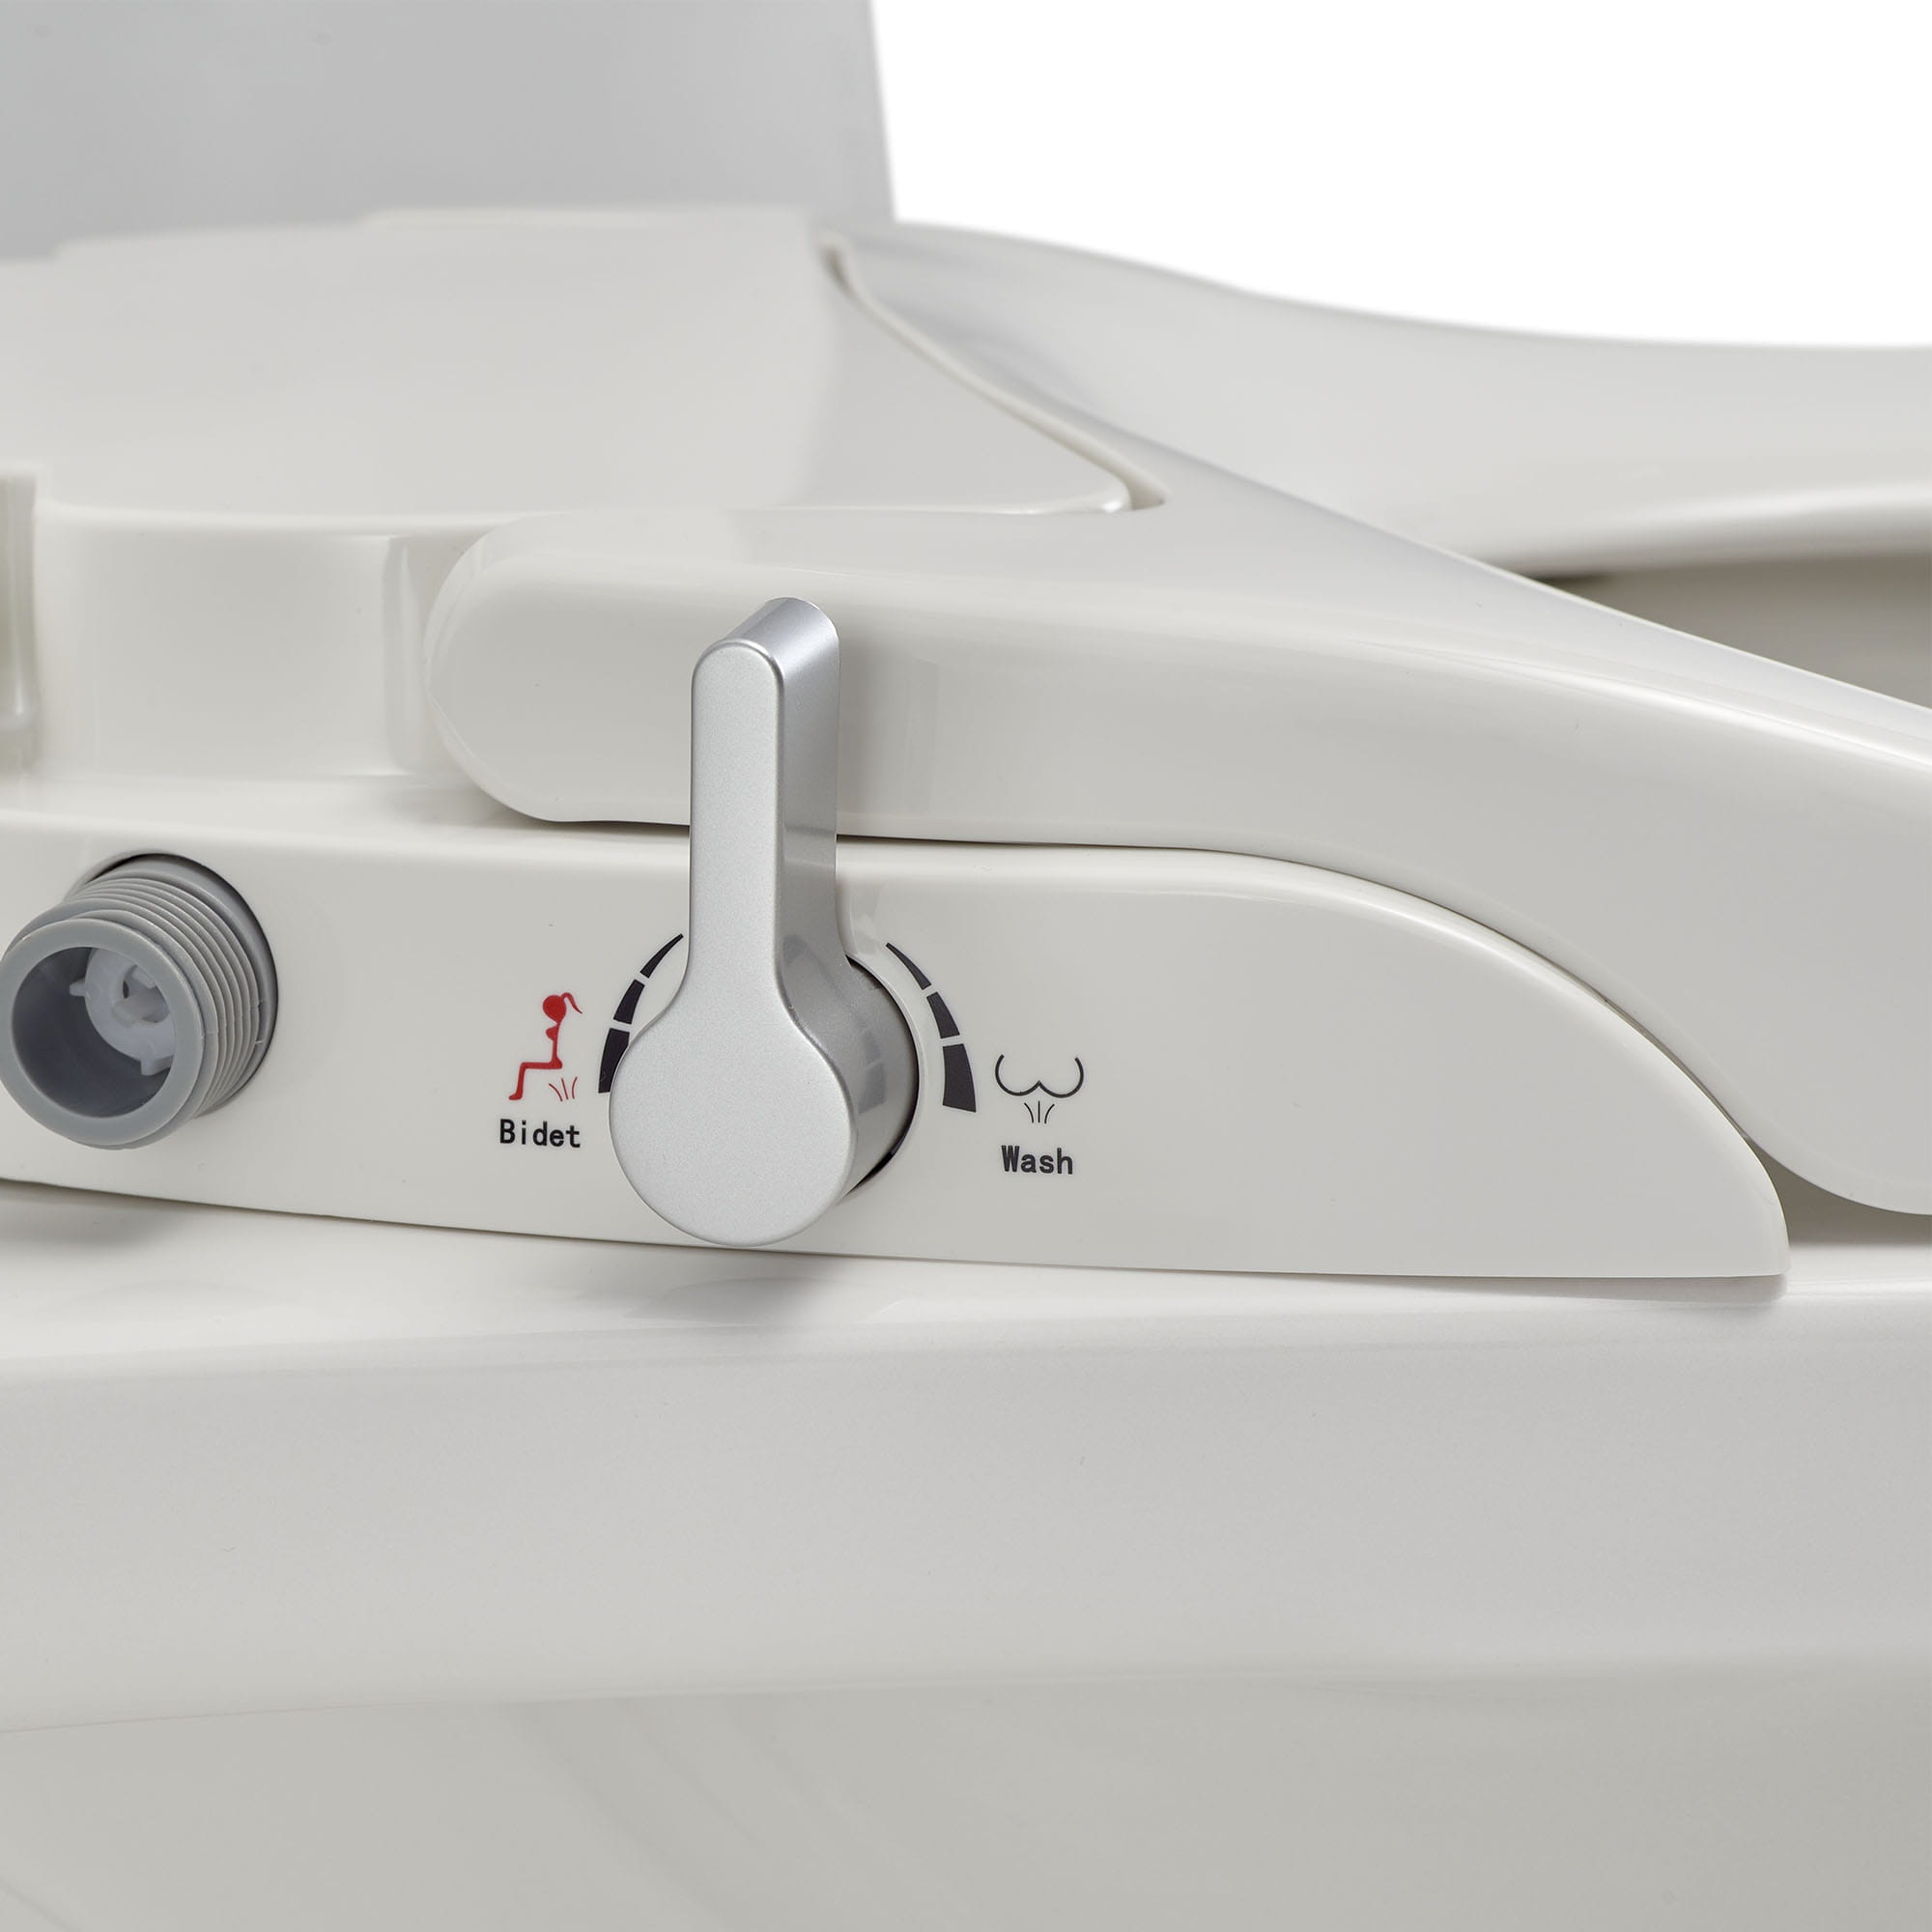 AquaWash 1.0 Non-Electric SpaLet Bidet Seat with Manual Operation